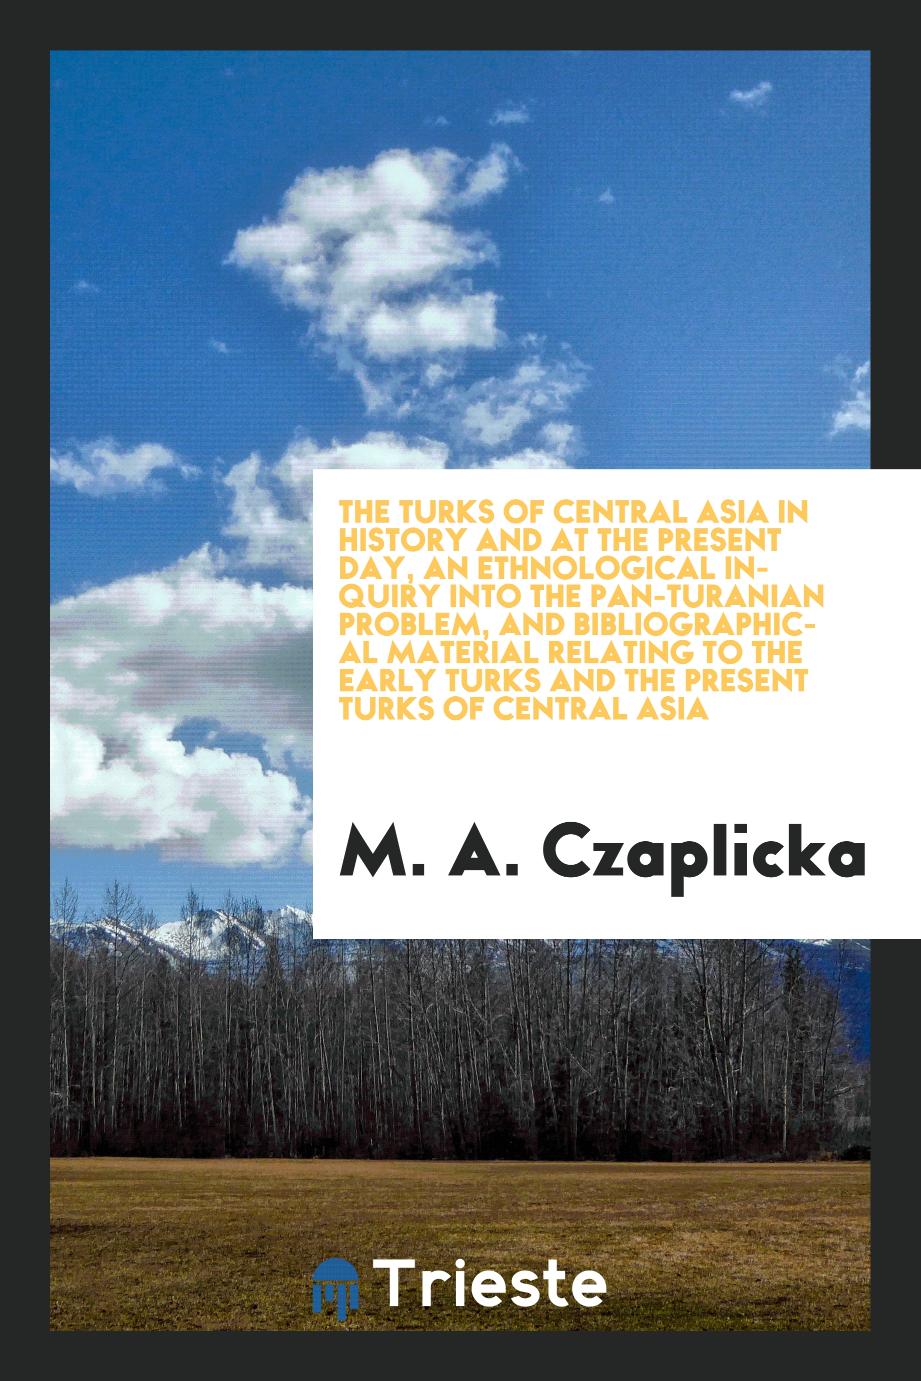 The Turks of Central Asia in history and at the present day, an ethnological inquiry into the Pan-Turanian problem, and bibliographical material relating to the early Turks and the present Turks of Central Asia